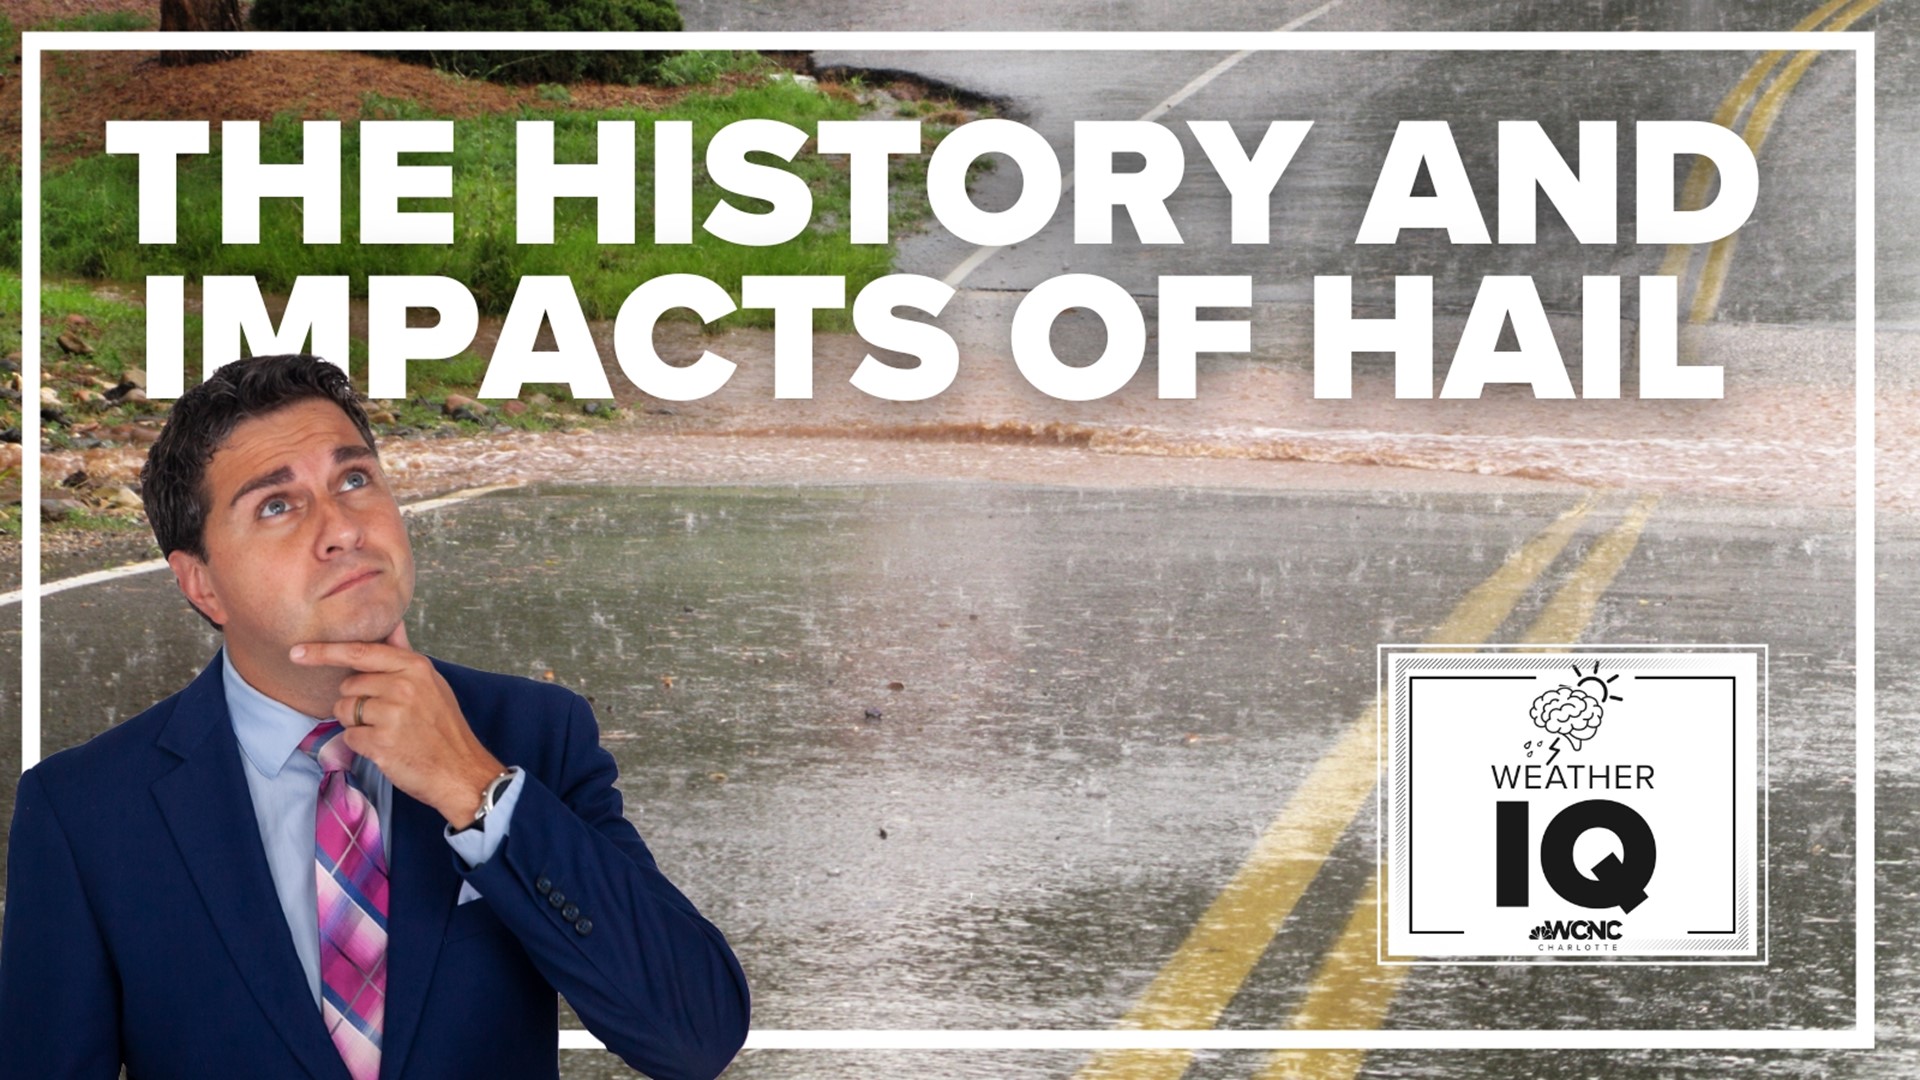 Chris Mulcahy explains the history and impacts of hail.